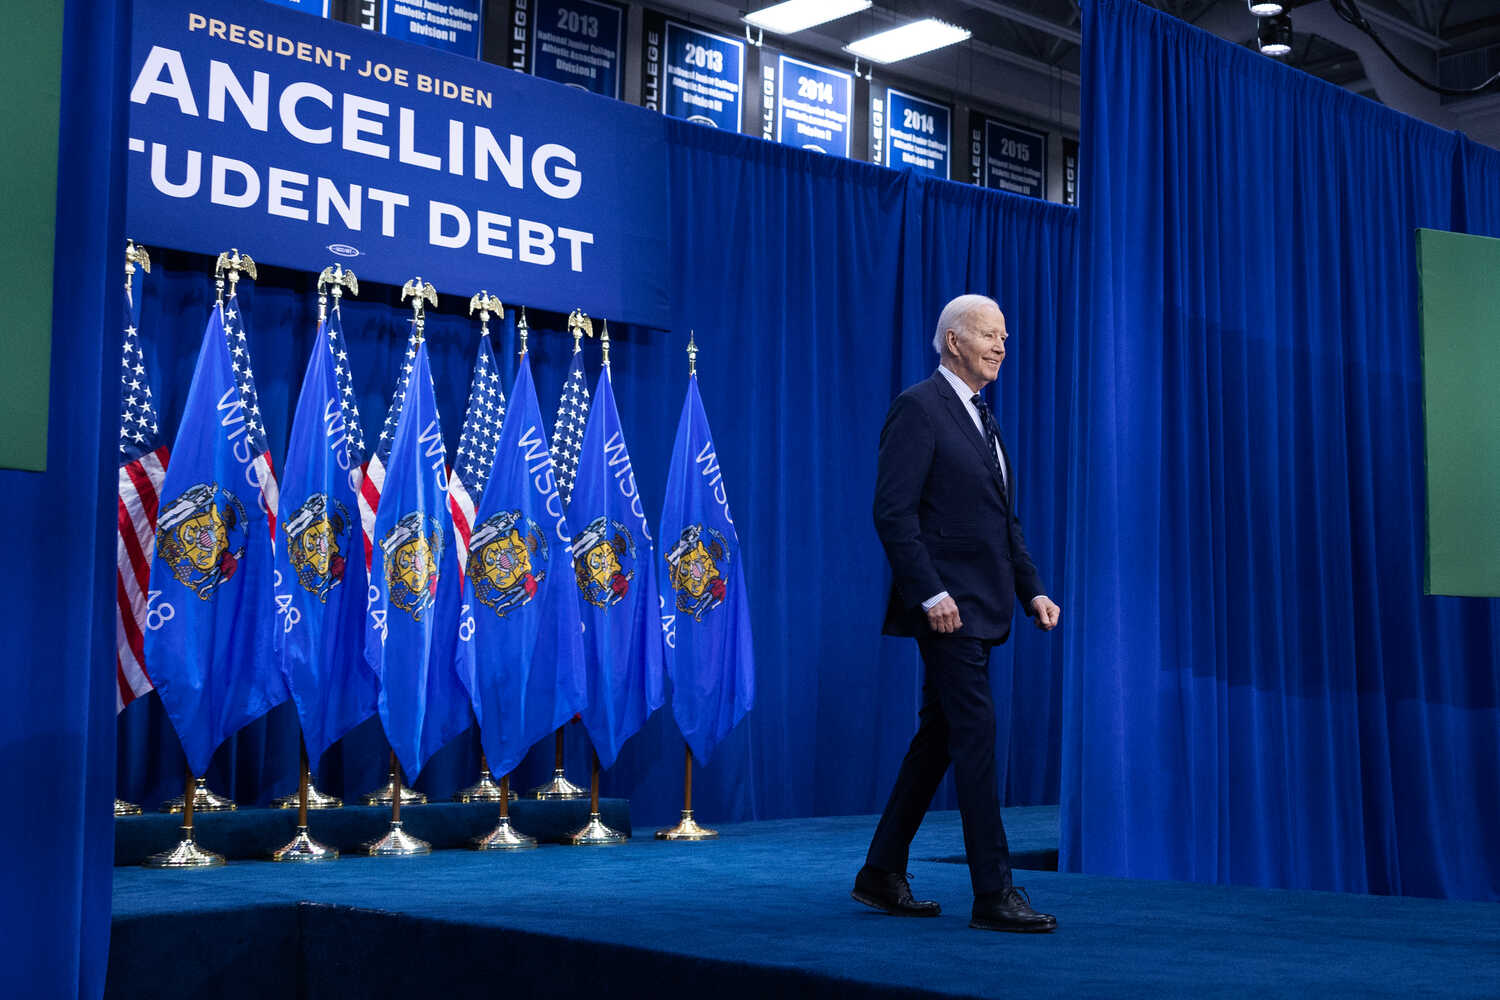 President Biden discussed his administration’s plan to lower student debt, earlier this year.